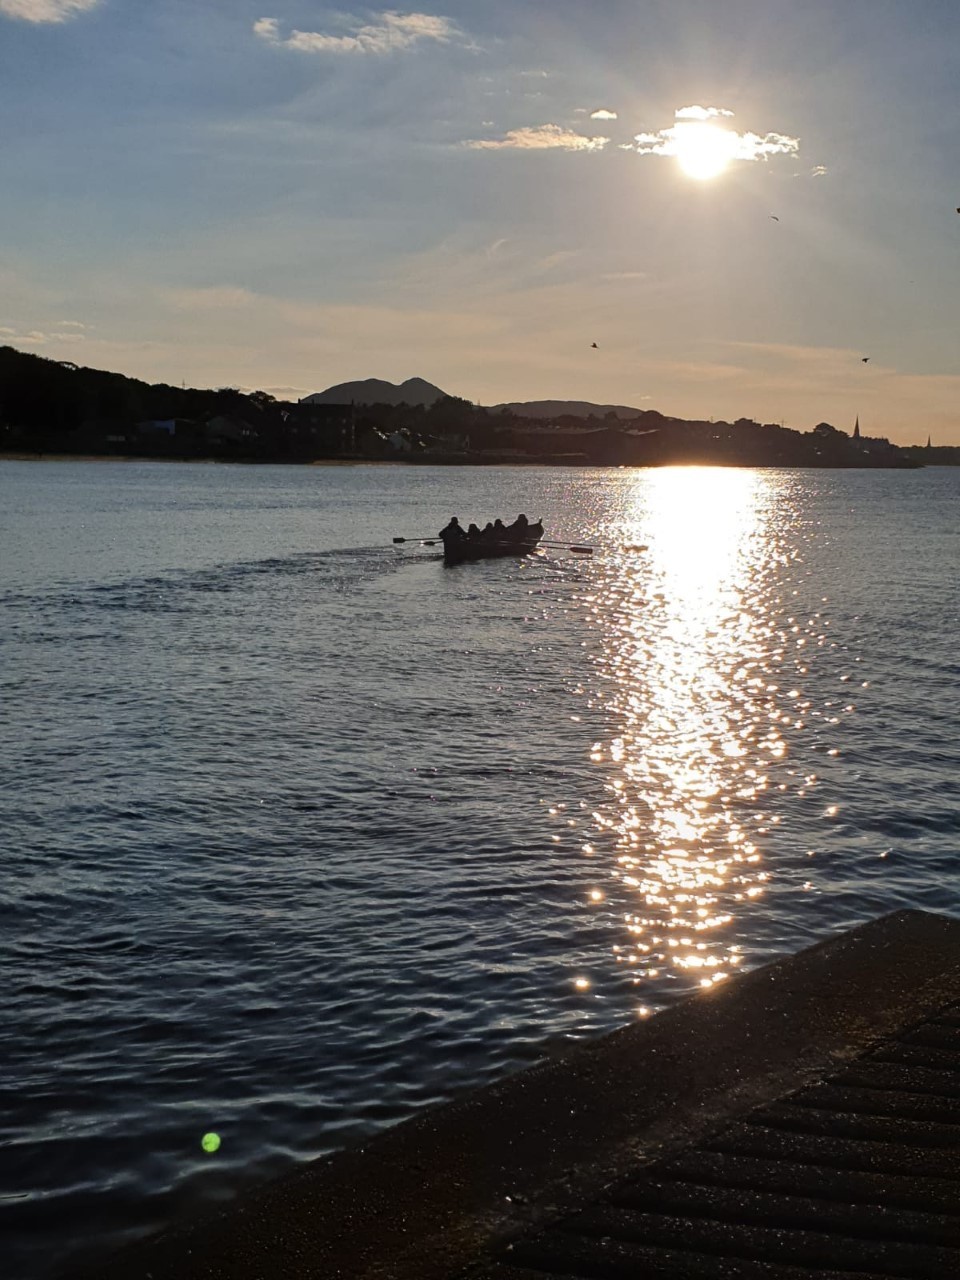 Coastal rowers from Musselburgh enjoy some practice prior to the Covid-19 pandemic and are now looking forward to a new boatshed in the future